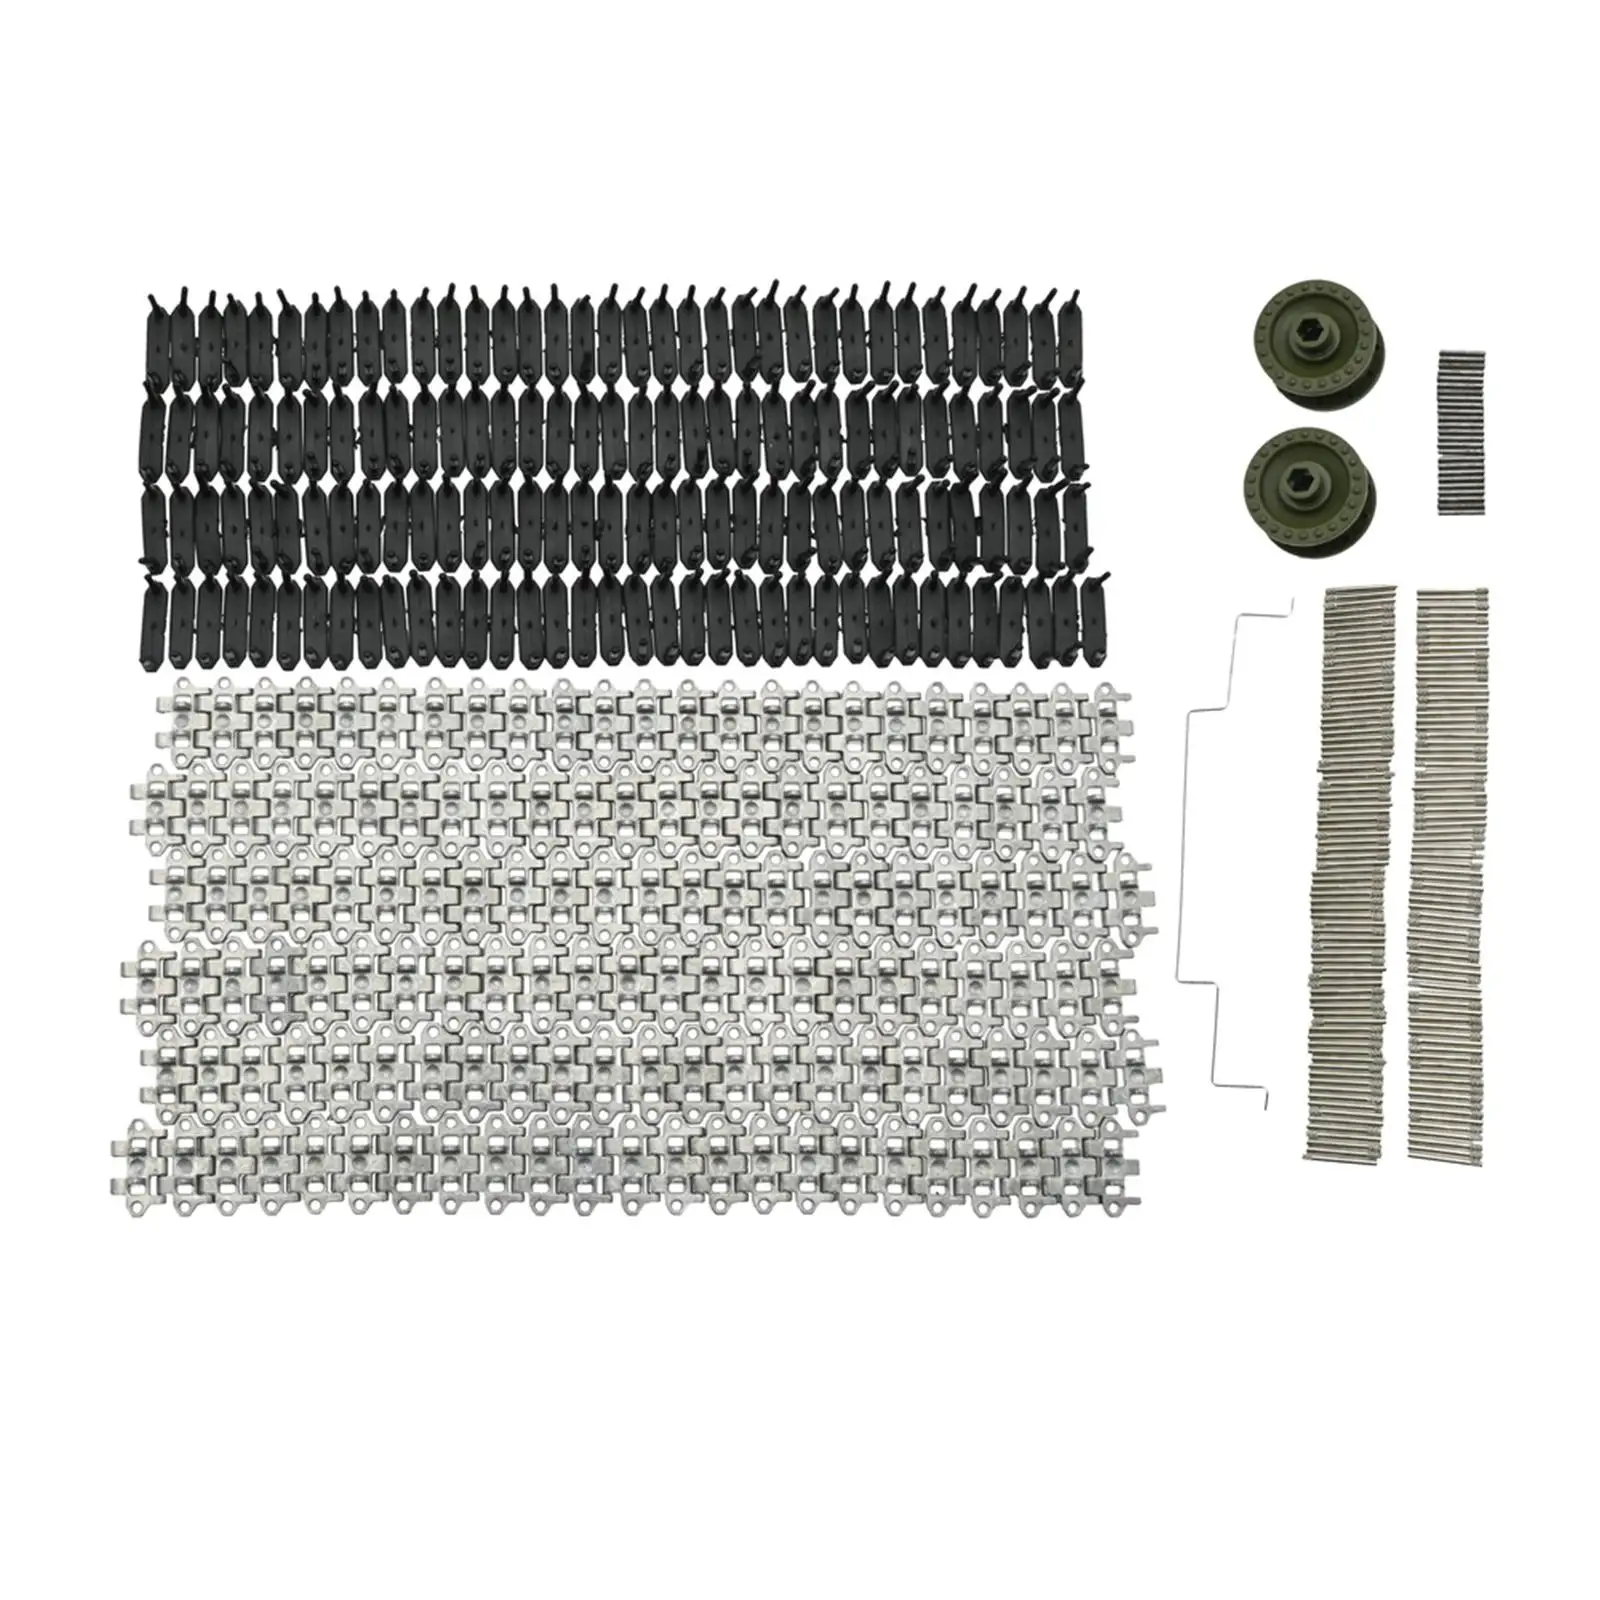 1/16 RC Track Upgrade Parts Replace Parts Accesories RC Tank Toy Accessory for RC Clawler Tracked Vehicle Accessories